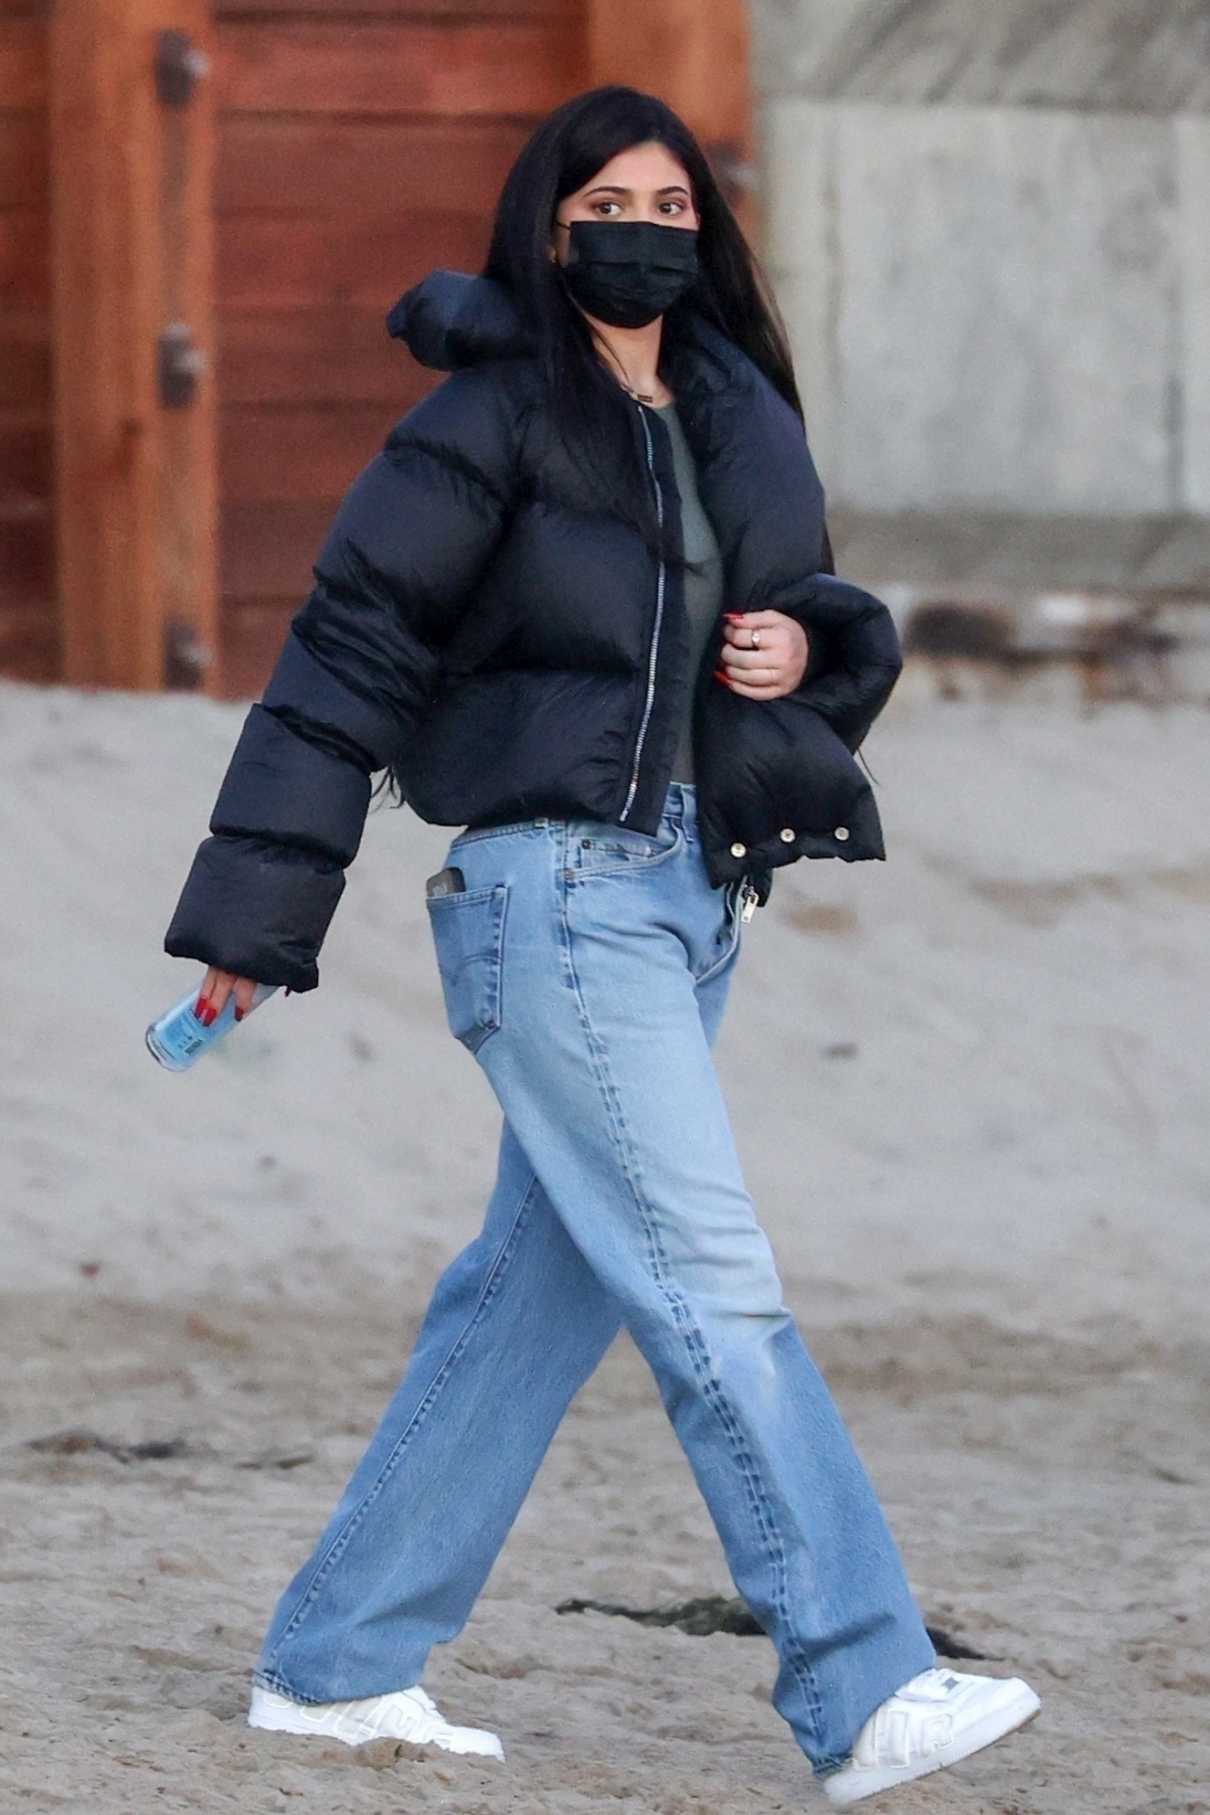 Kylie Jenner in a Black Puffer Jacket